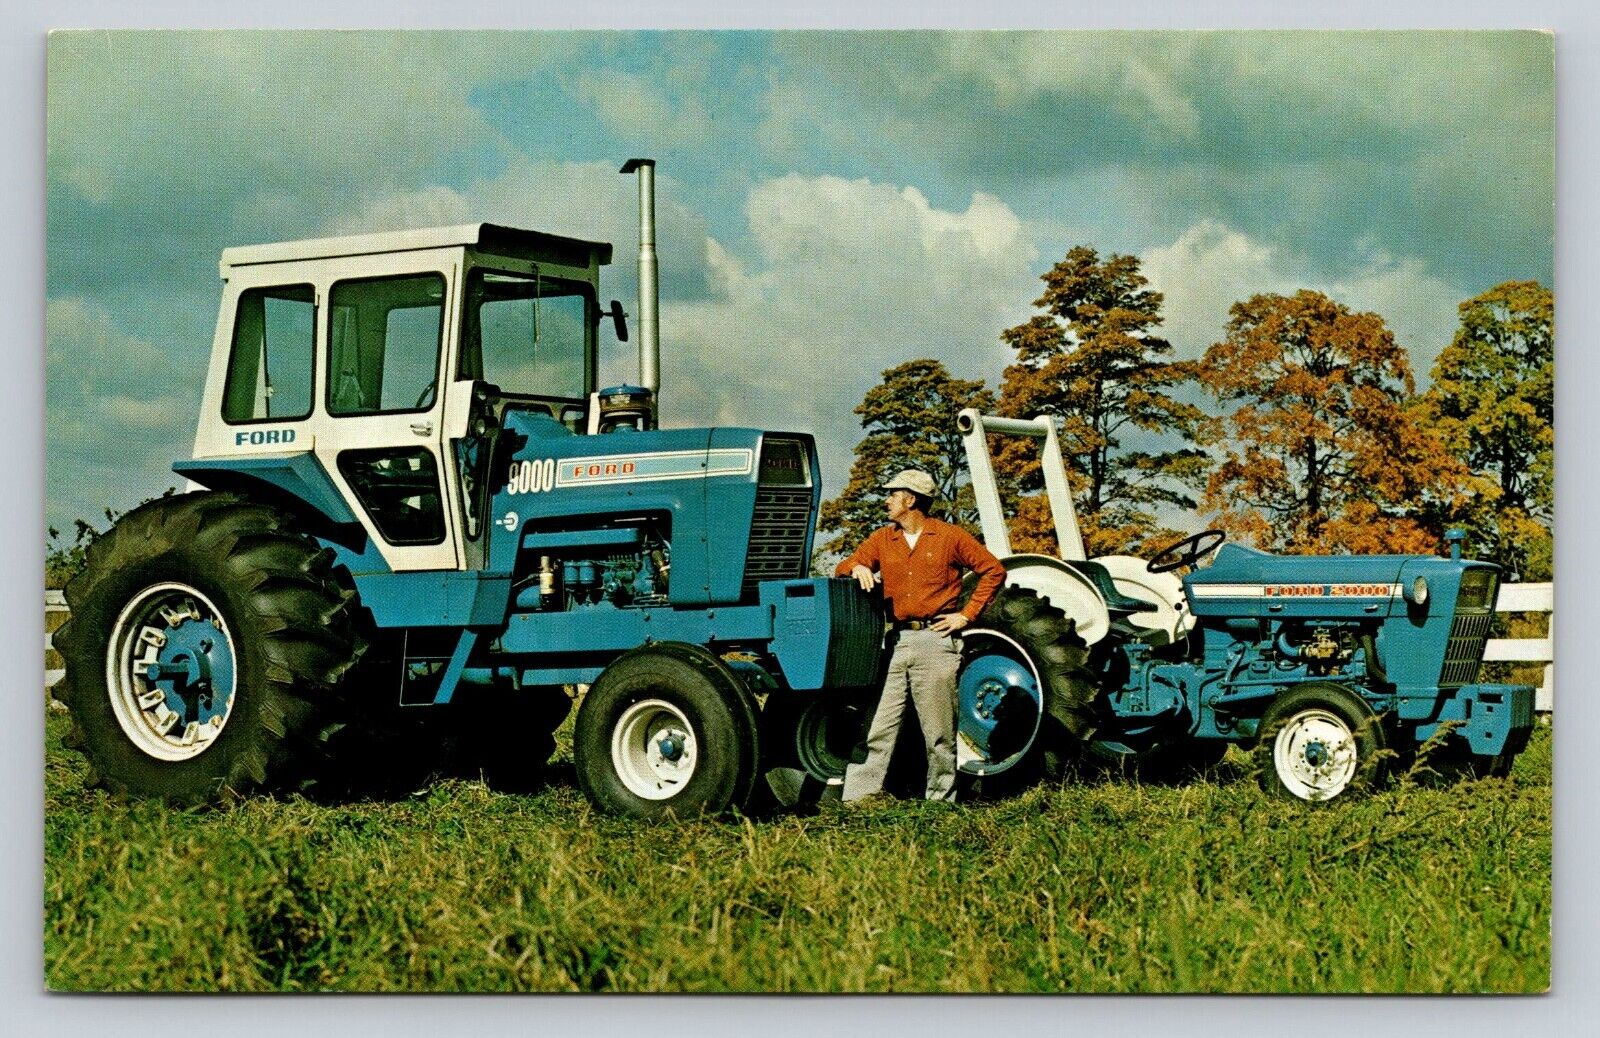 c1969 Ford Blue is Better Farm Tractor Ford 9000 Vintage Advertising Postcard